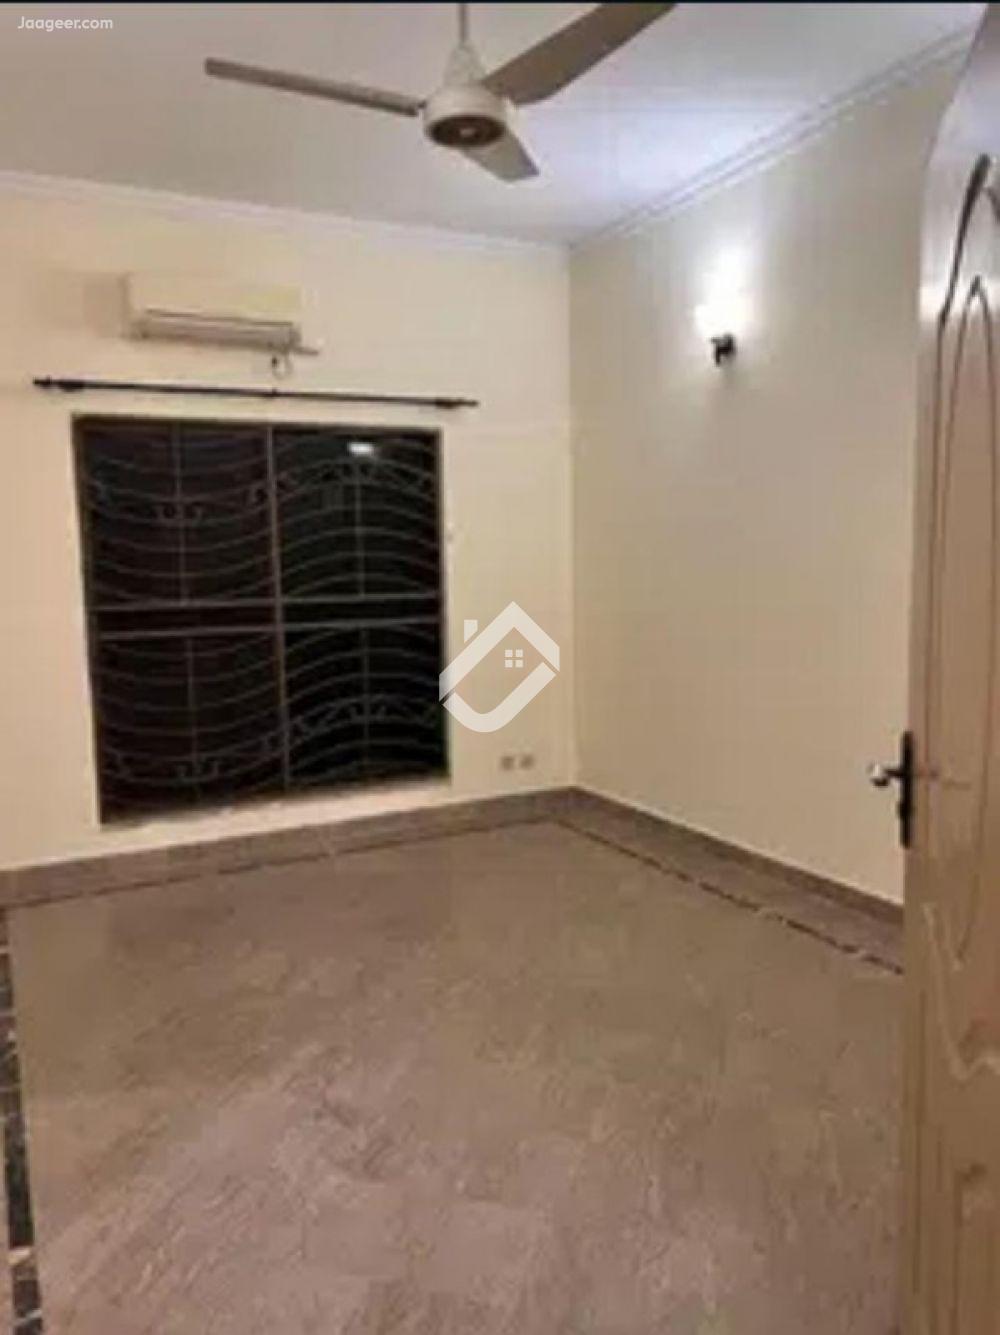 View  10 Marla Lower Portion House For Rent In DHA Phase 1 in DHA Phase 1, Lahore